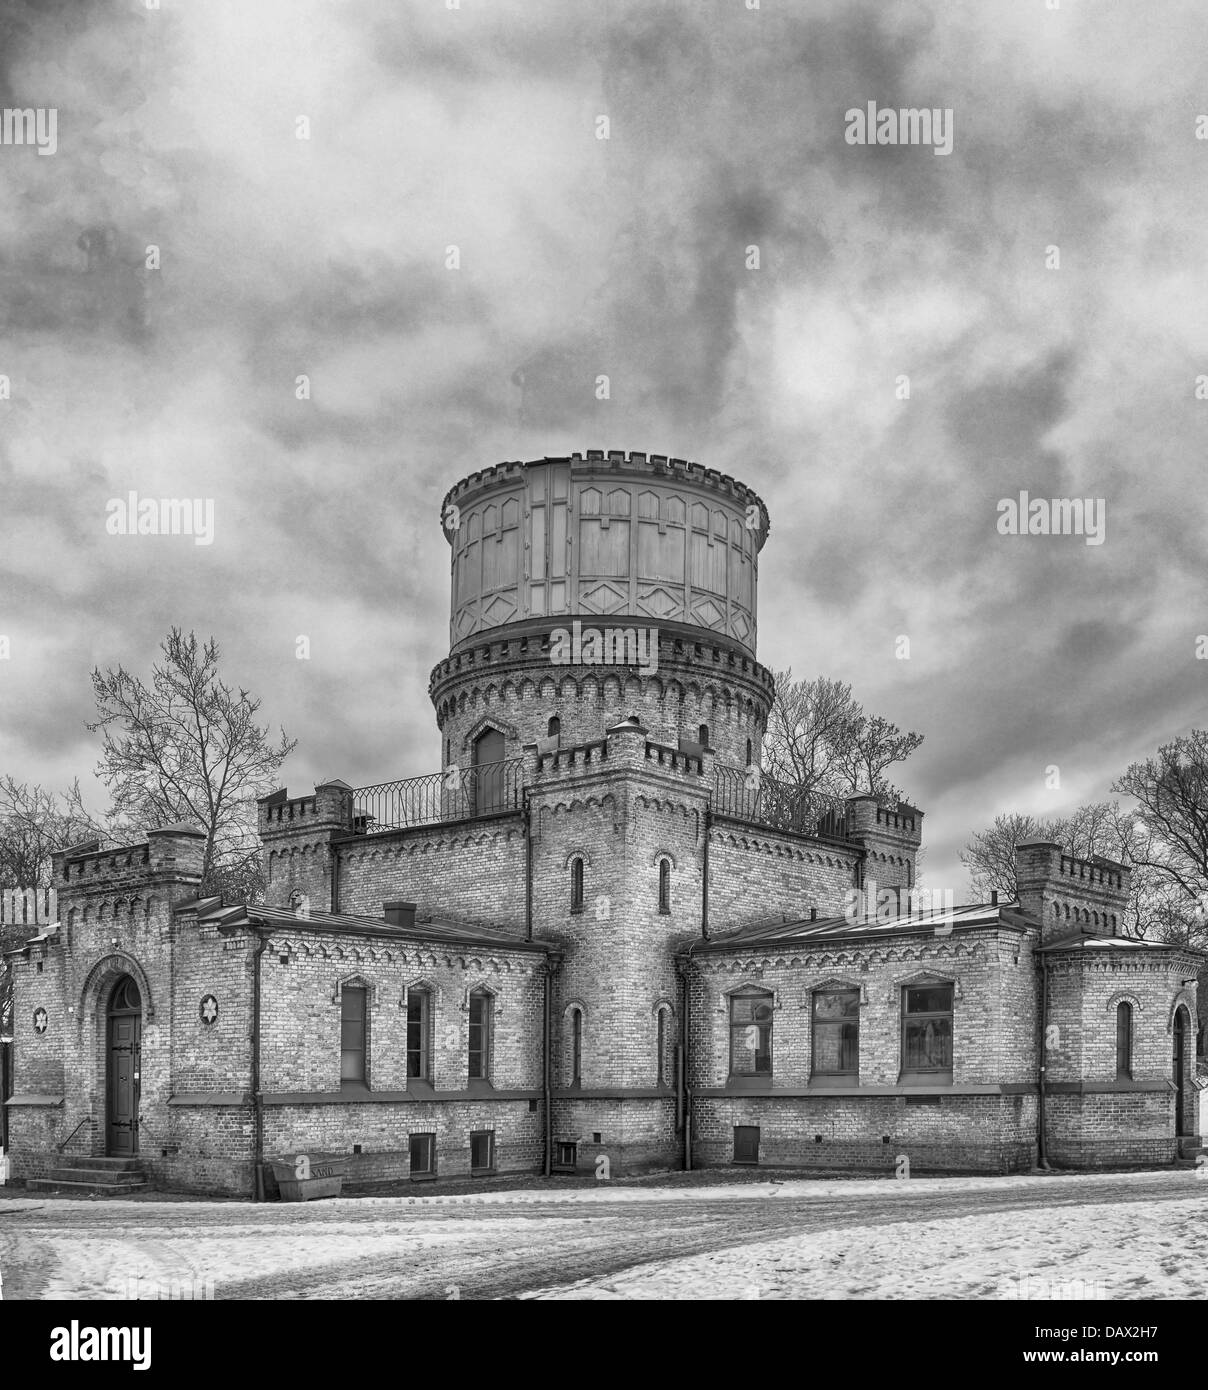 An old nineteenth century observatory situated in the Swedish city of Lund. Stock Photo